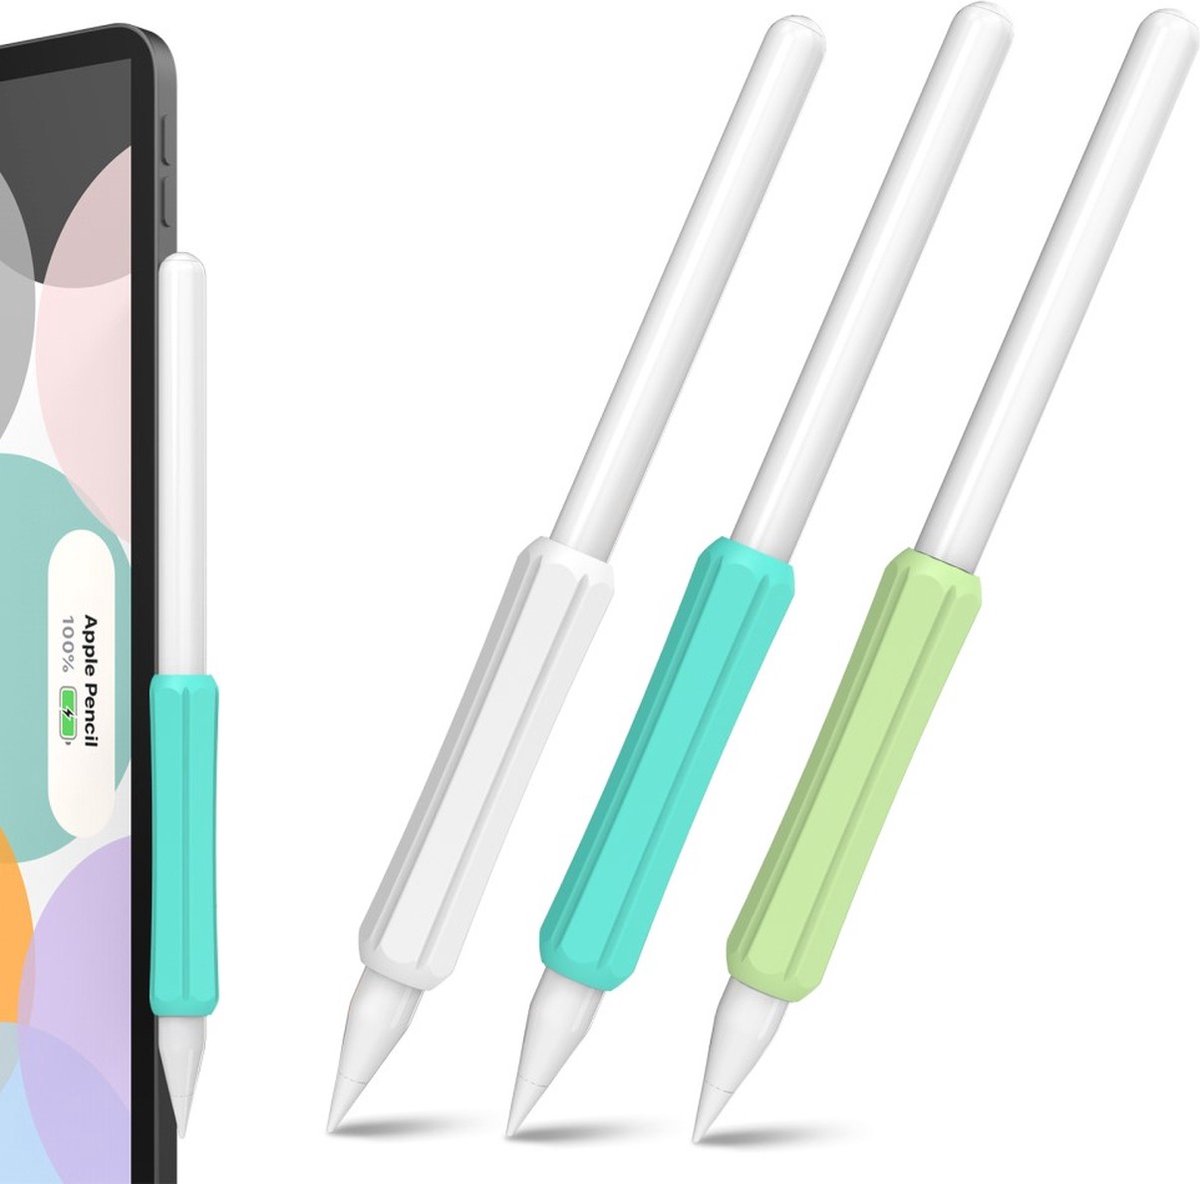 Stoyobe Apple Stylus Gen 1/2 Grip Sleeve - Silicone Cover - White / Blue / Green - 3 Pack